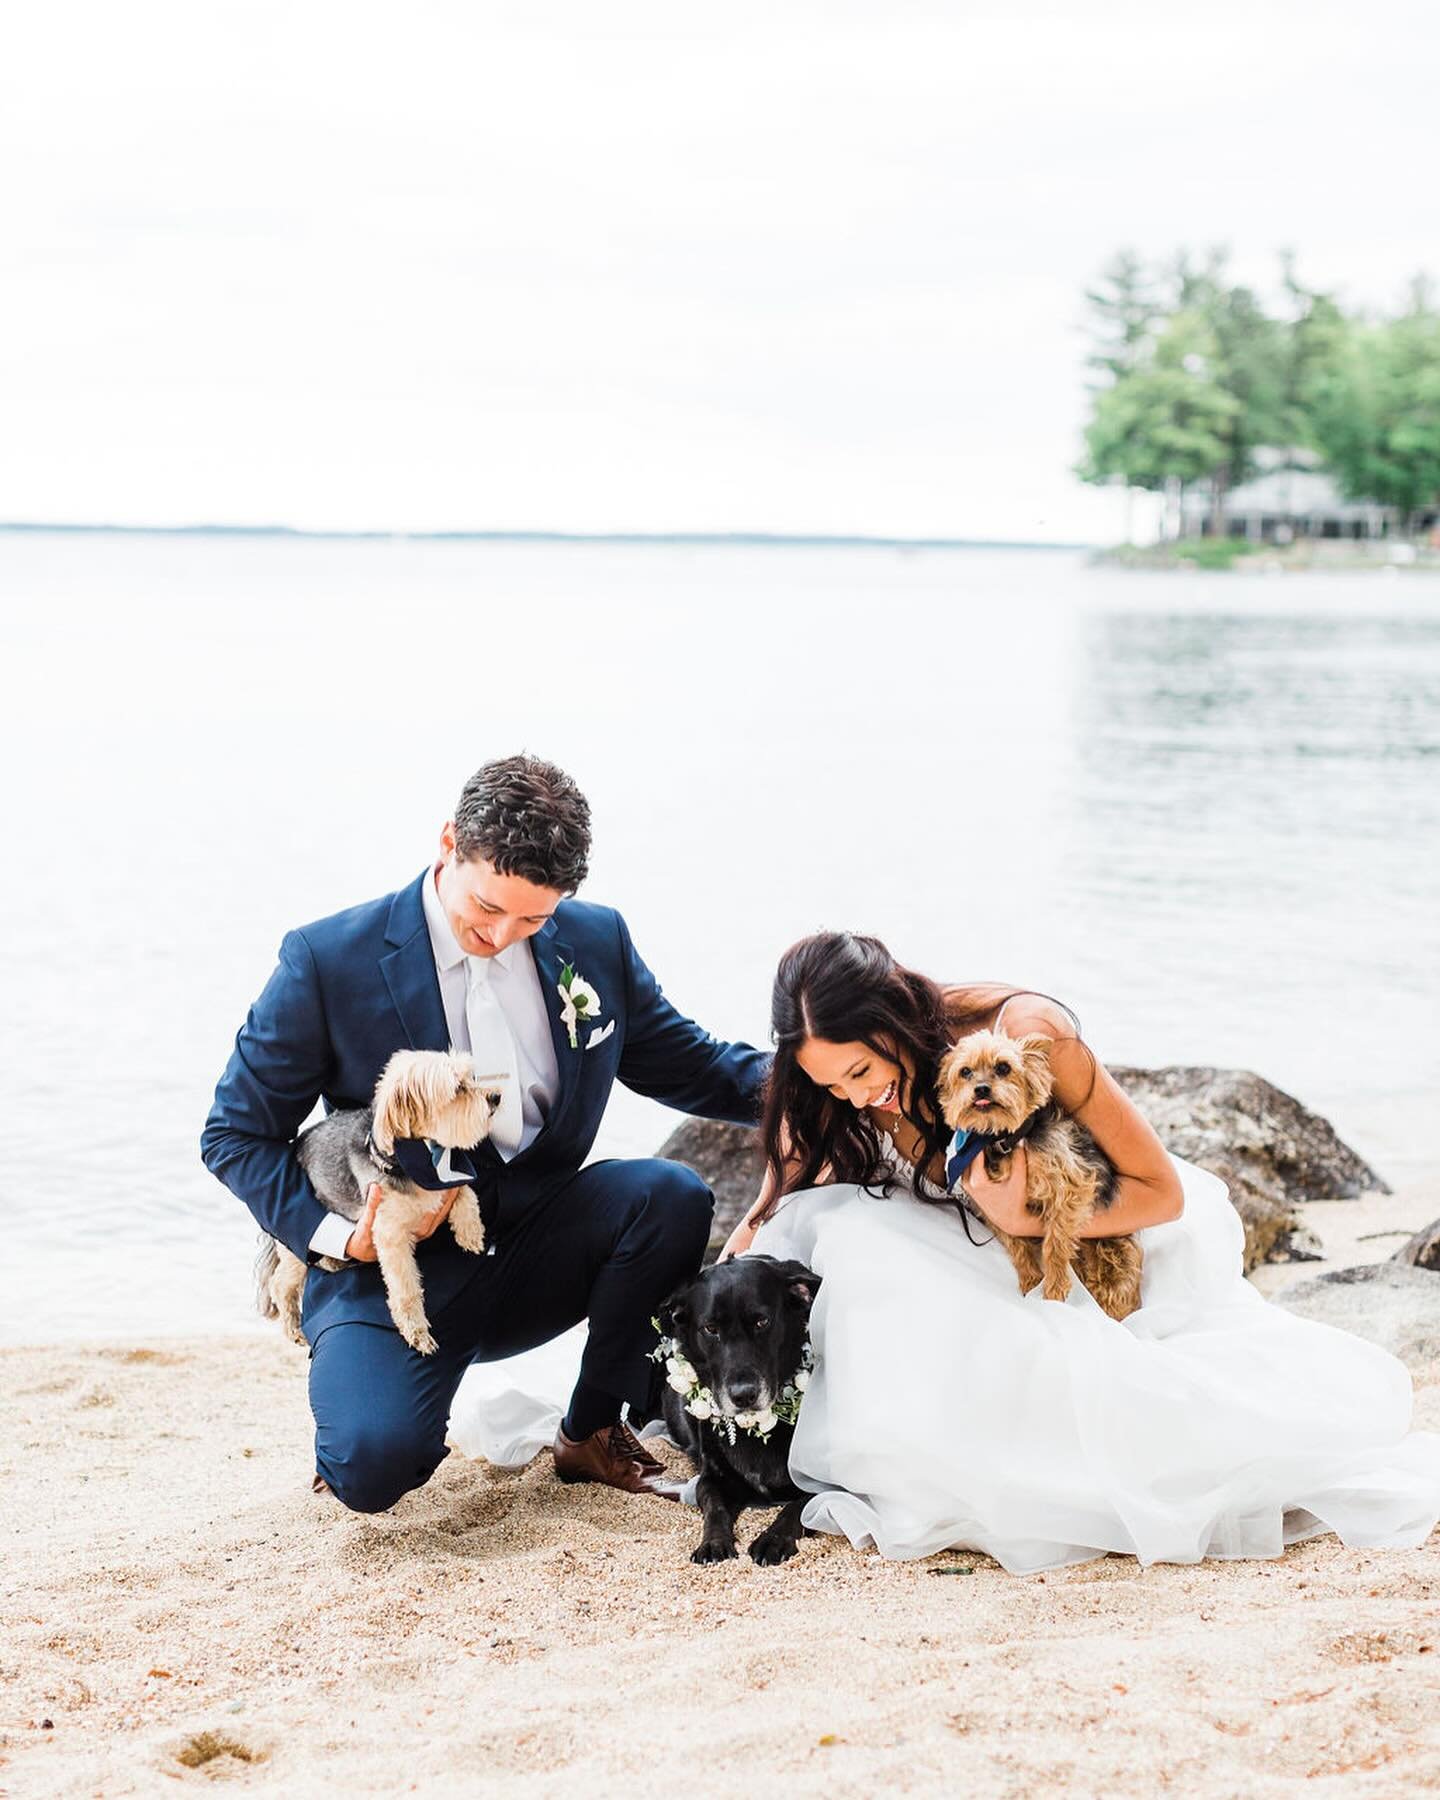 couples portrait GOALS: please let all first looks follow with snuggles with  3 cutey pups, a ride on a gorgeous boat, and a walk on the beach. 💞
.
.
.
📸: @thelibbysphotoandfilms 
venue: @autumnlaneestate 
hair and makeup: @natashathehairfairy 
flo